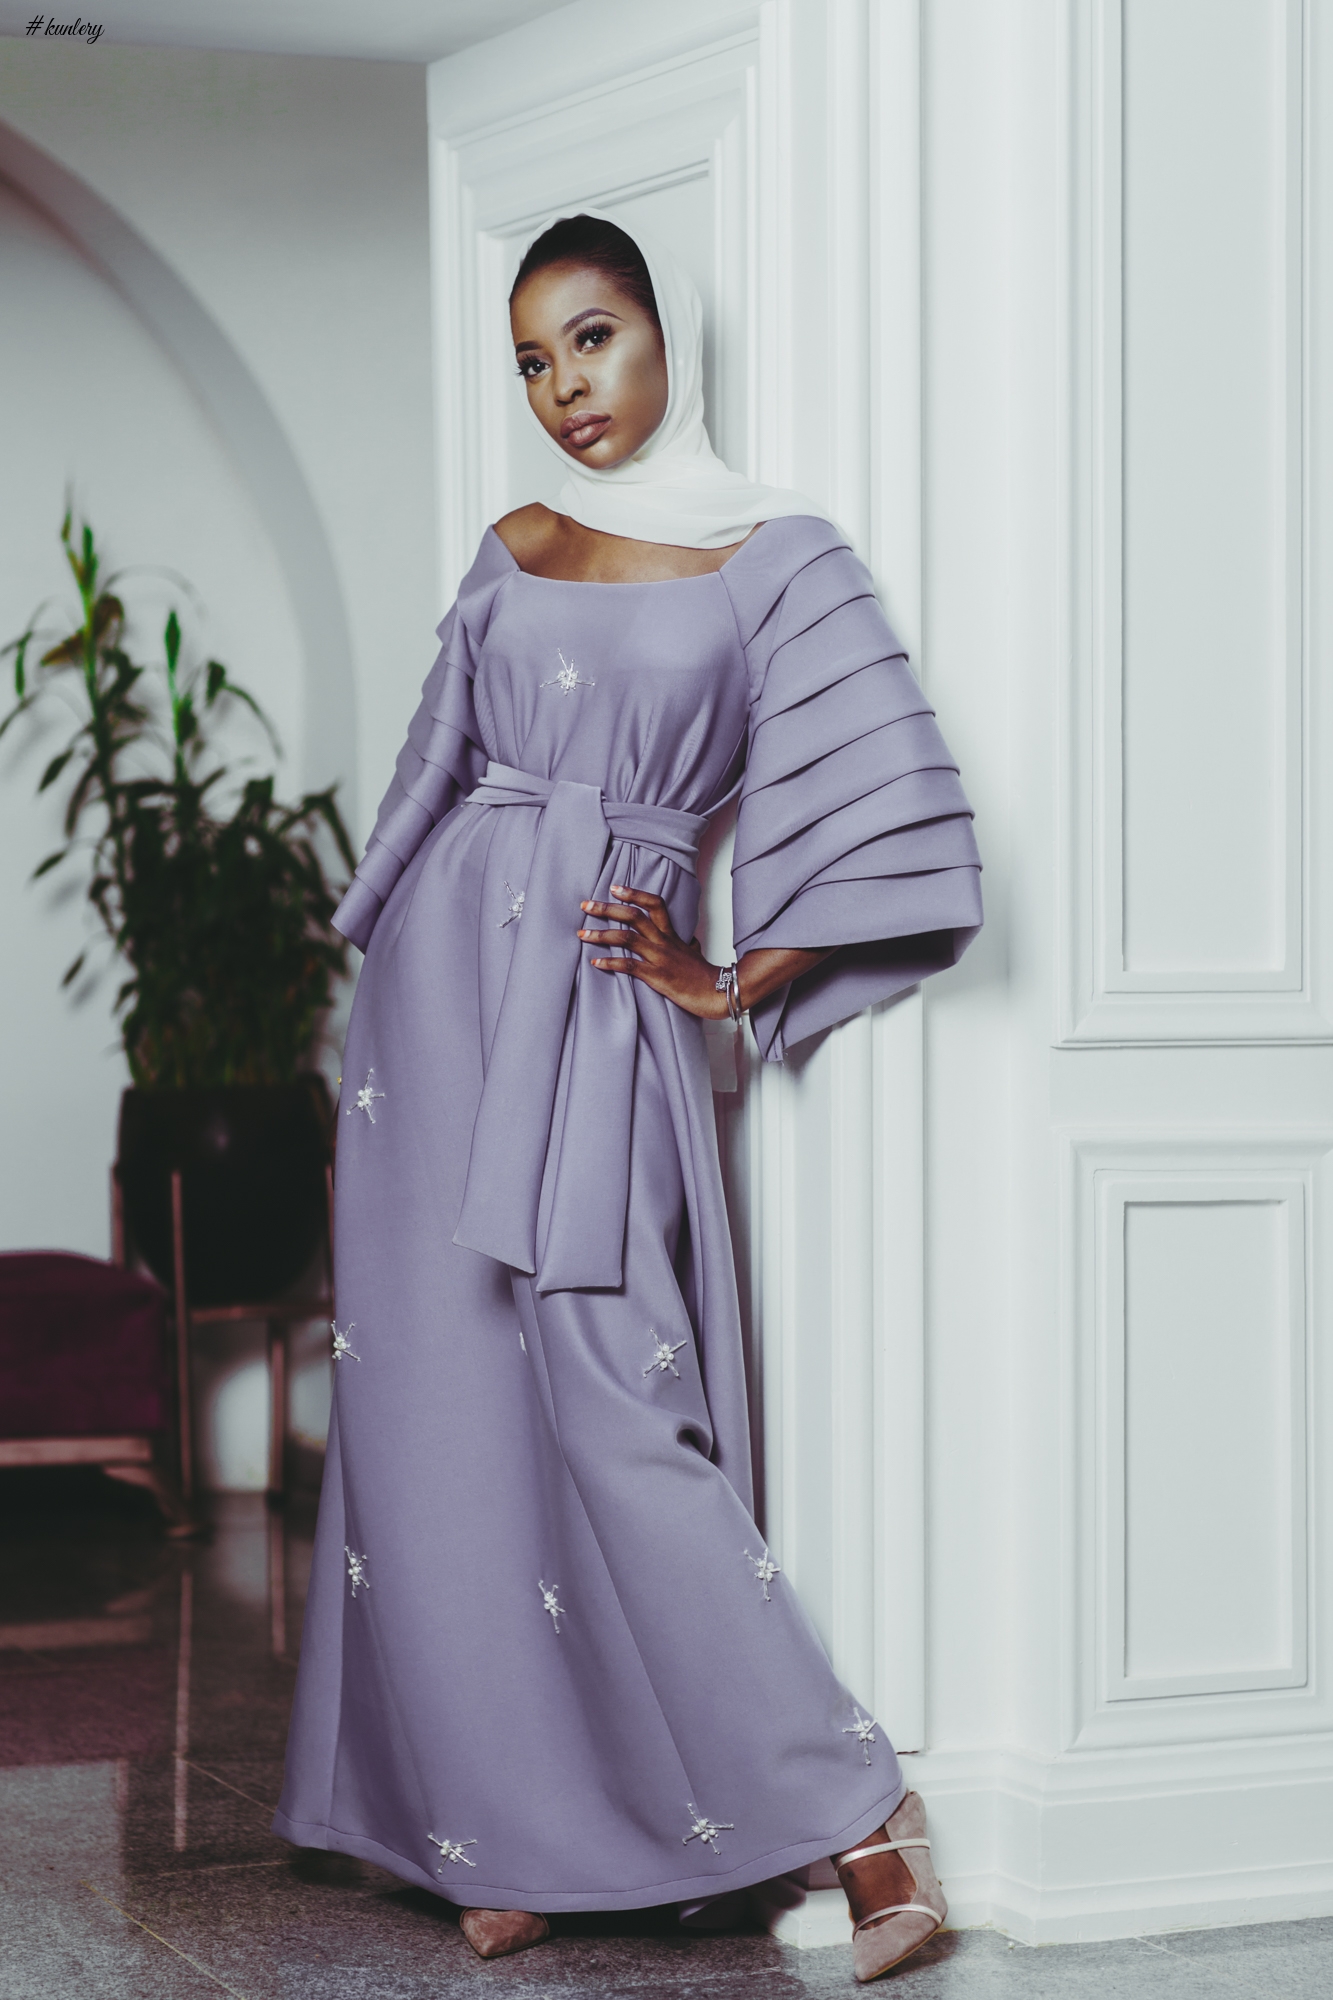 Womenswear Brand Amnas Releases 2018 Collection In Anticipation Of Ramadan